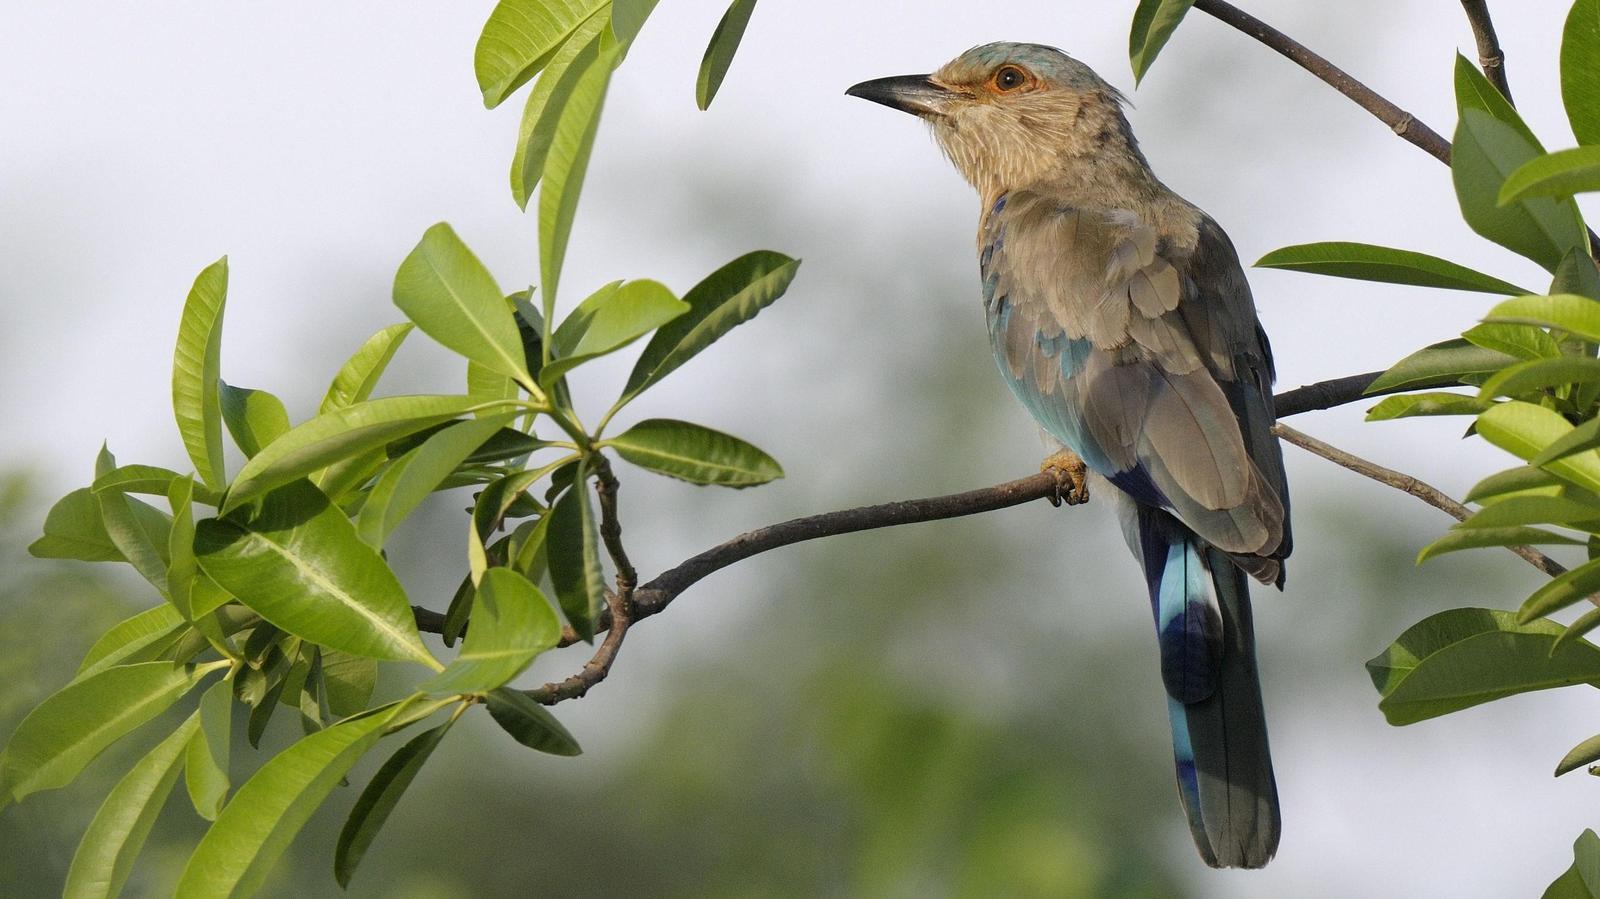 Indian/Indochinese Roller Photo by Kishore Bhargava